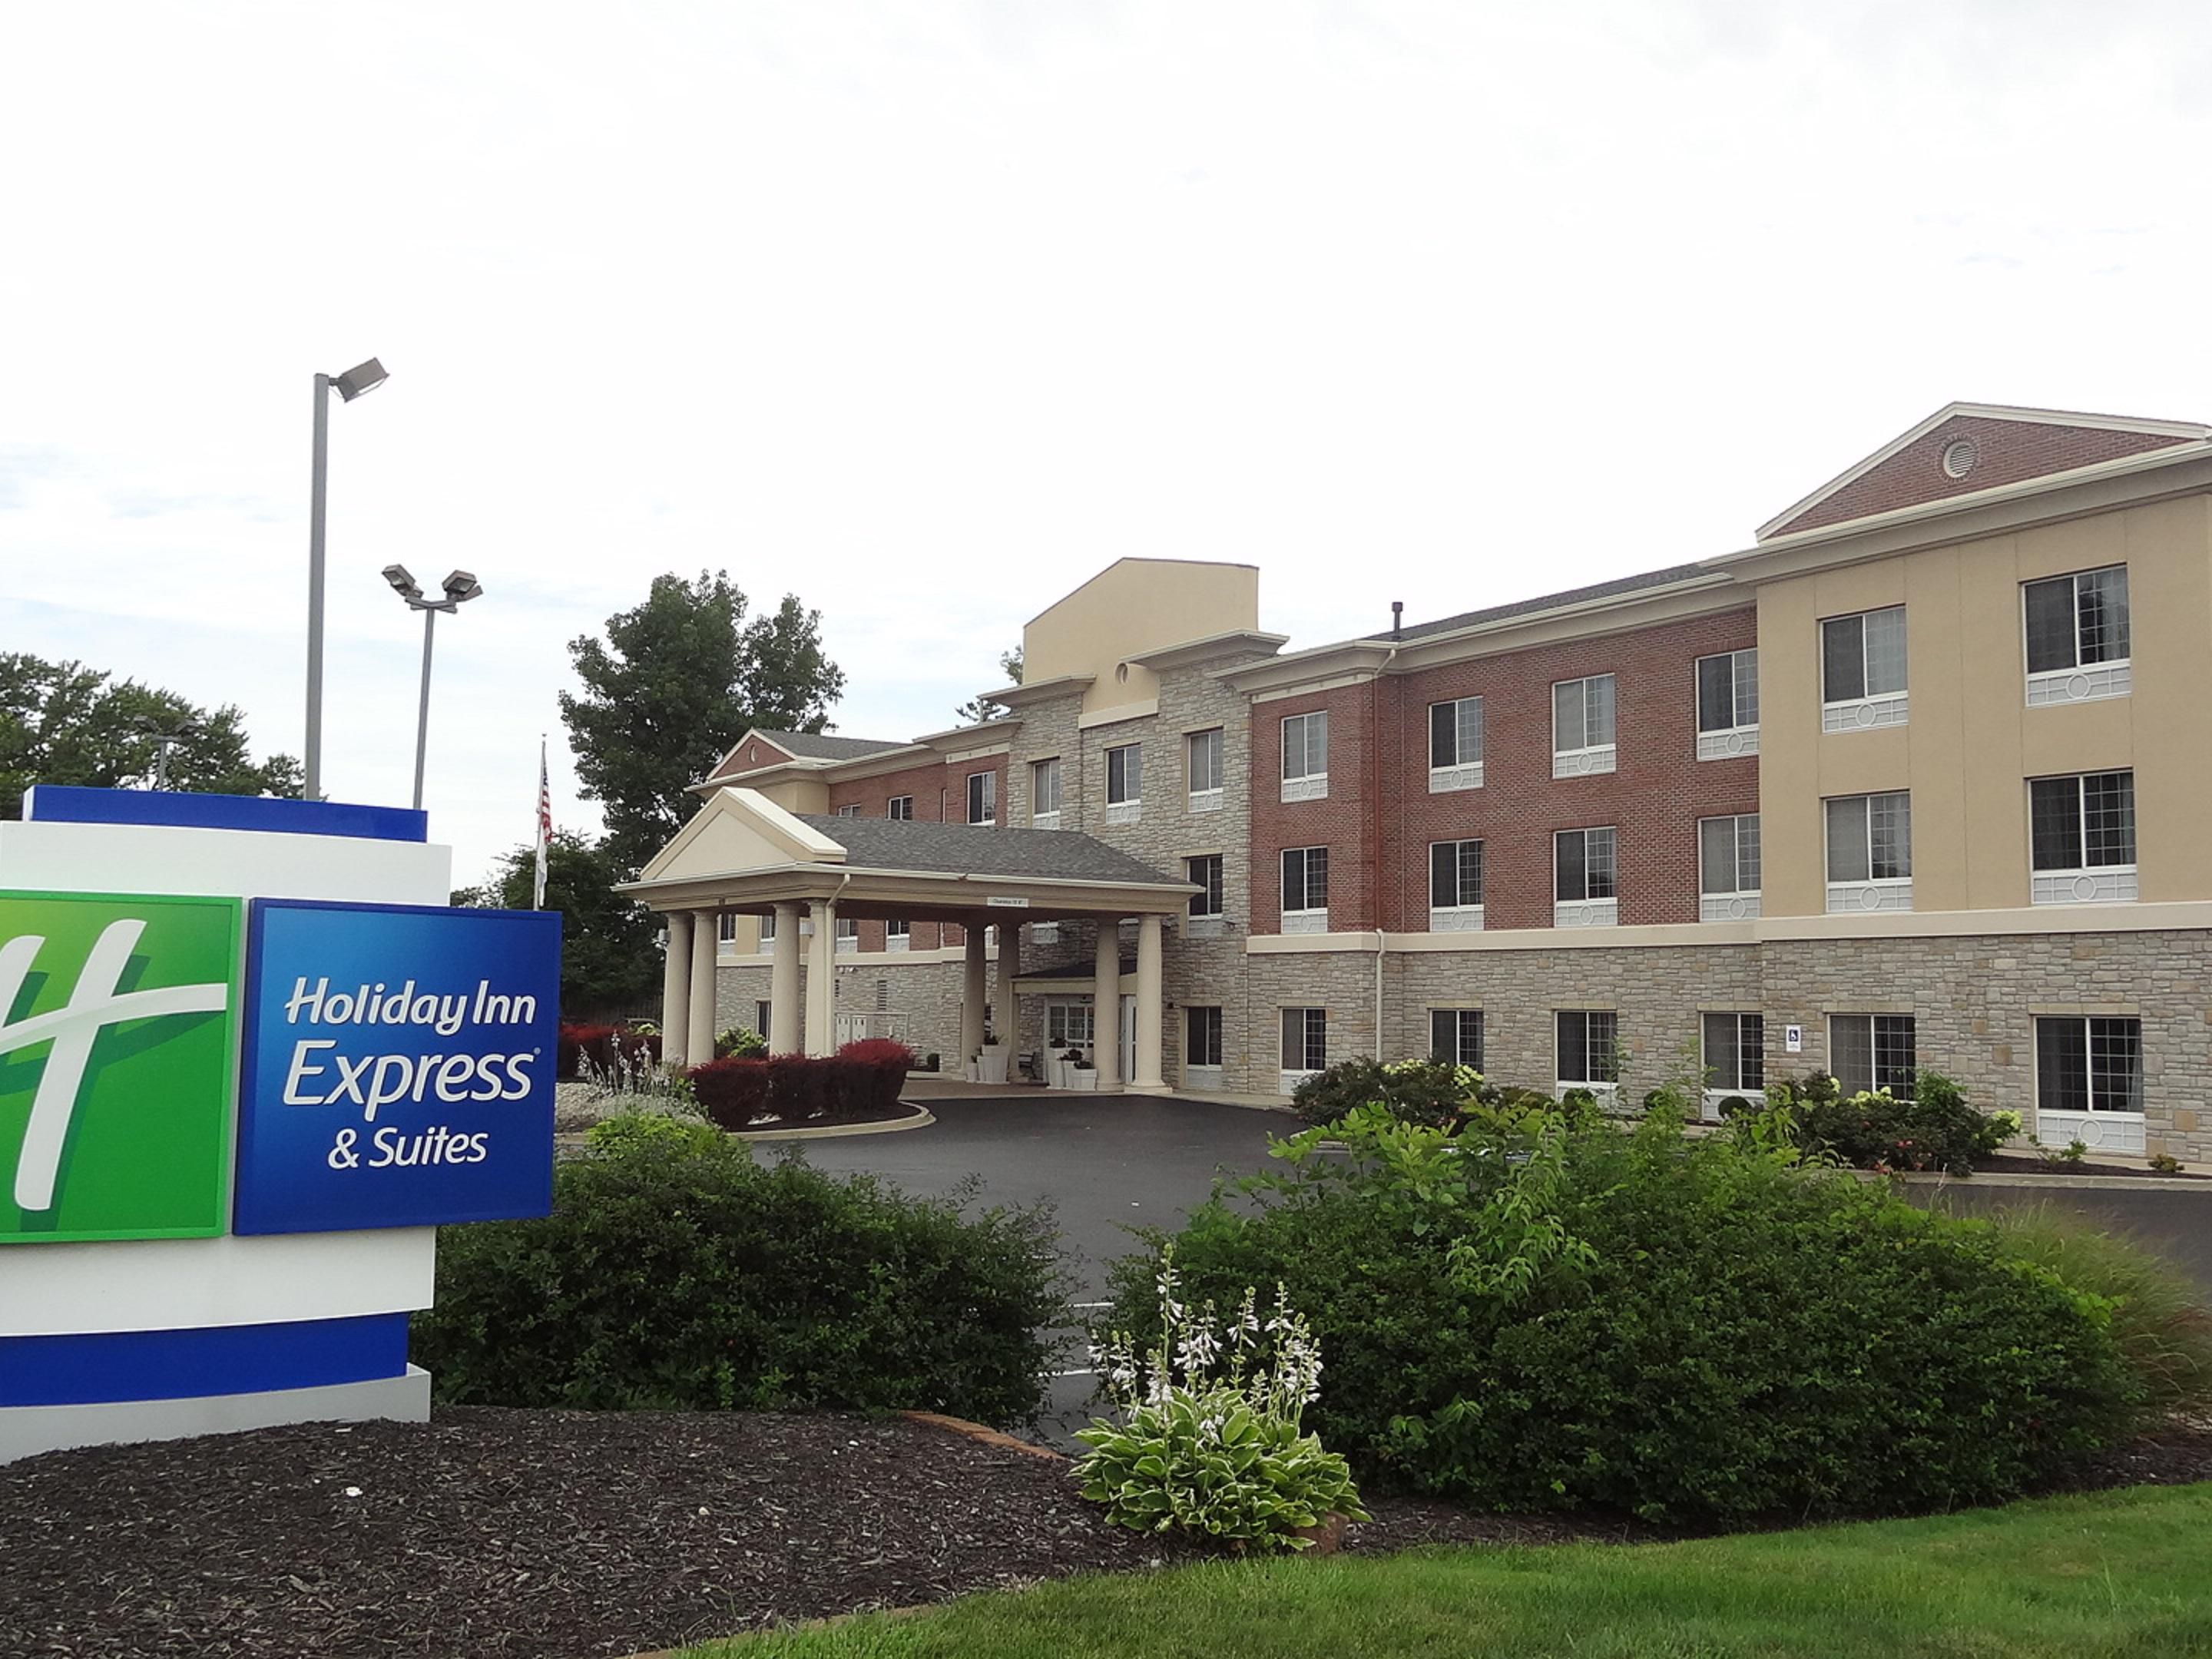 Hotels On Michigan Rd Indianapolis Holiday Inn Express Suites